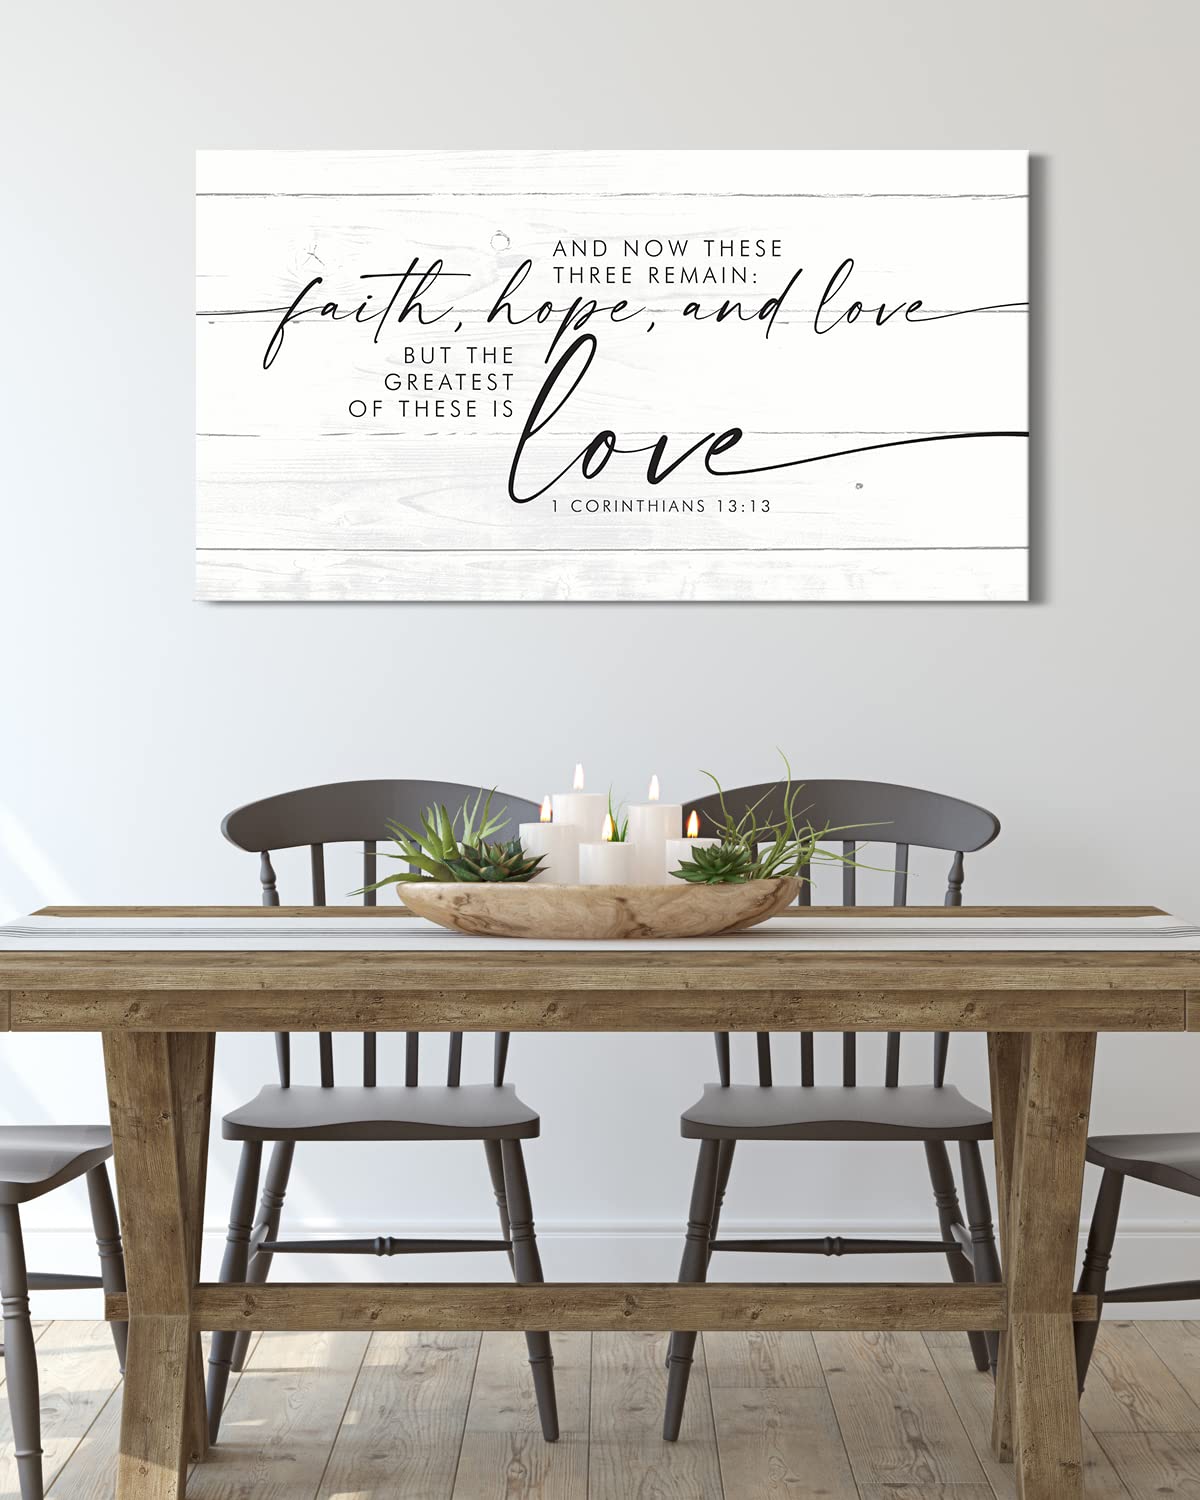 Bedroom Wall Decor Above Bed - And Now These Three Remain Room Decor - 1 Corinthians Sign - Bible Verses Wall Decor - Bridal Shower Wedding Gift For Couple